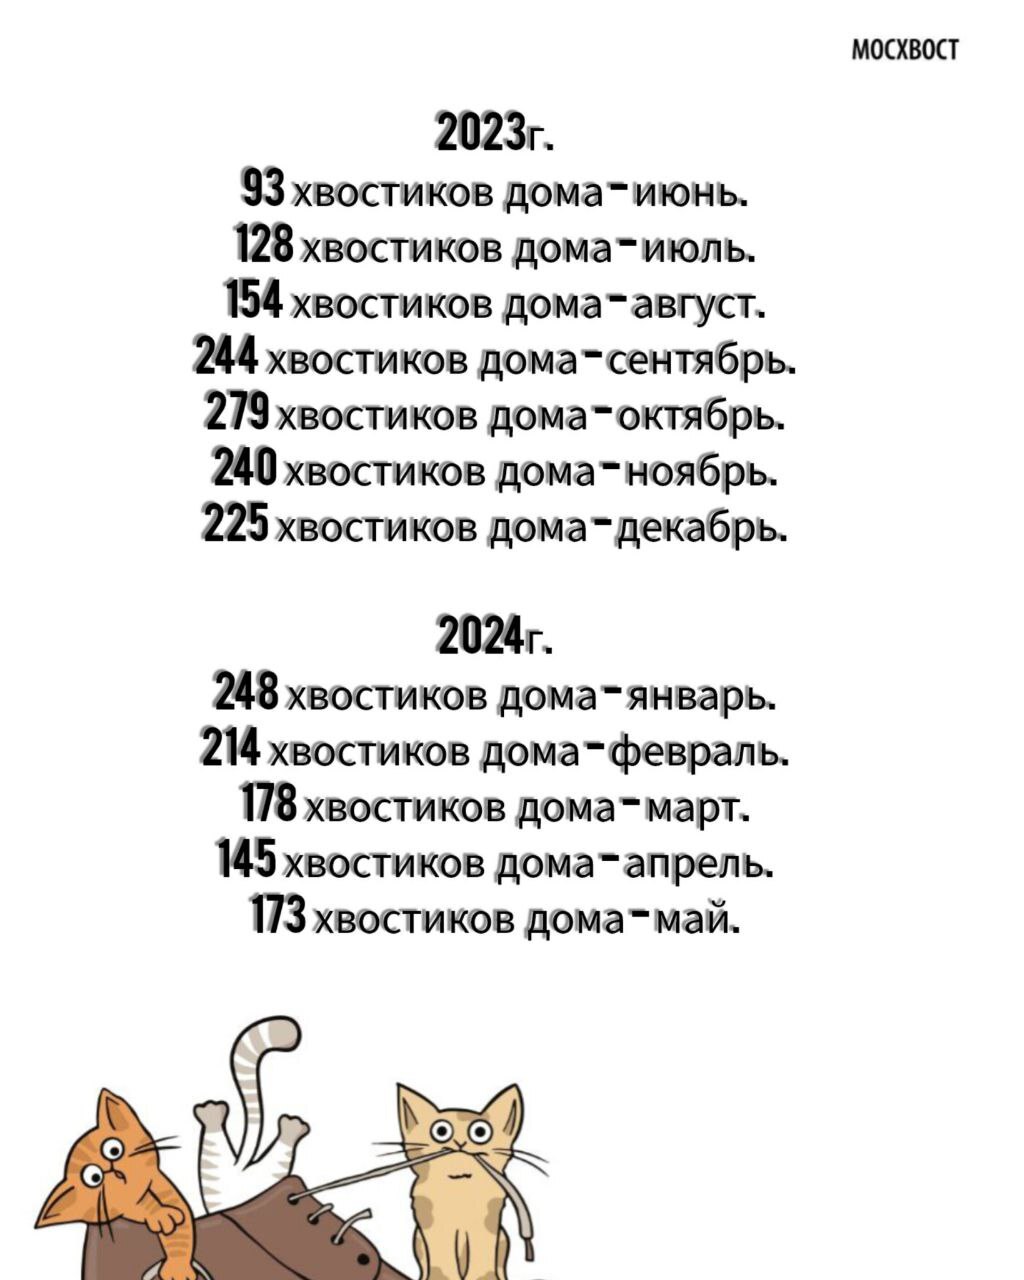 Moskhvost device statistics - No rating, Fat cats, Pet the cat, Black cat, cat, In good hands, Is free, Pets, Animals, Dog, Cats and dogs together, Dog lovers, Stray dogs, Kittens, Shelter, Animal shelter, Homeless animals, My